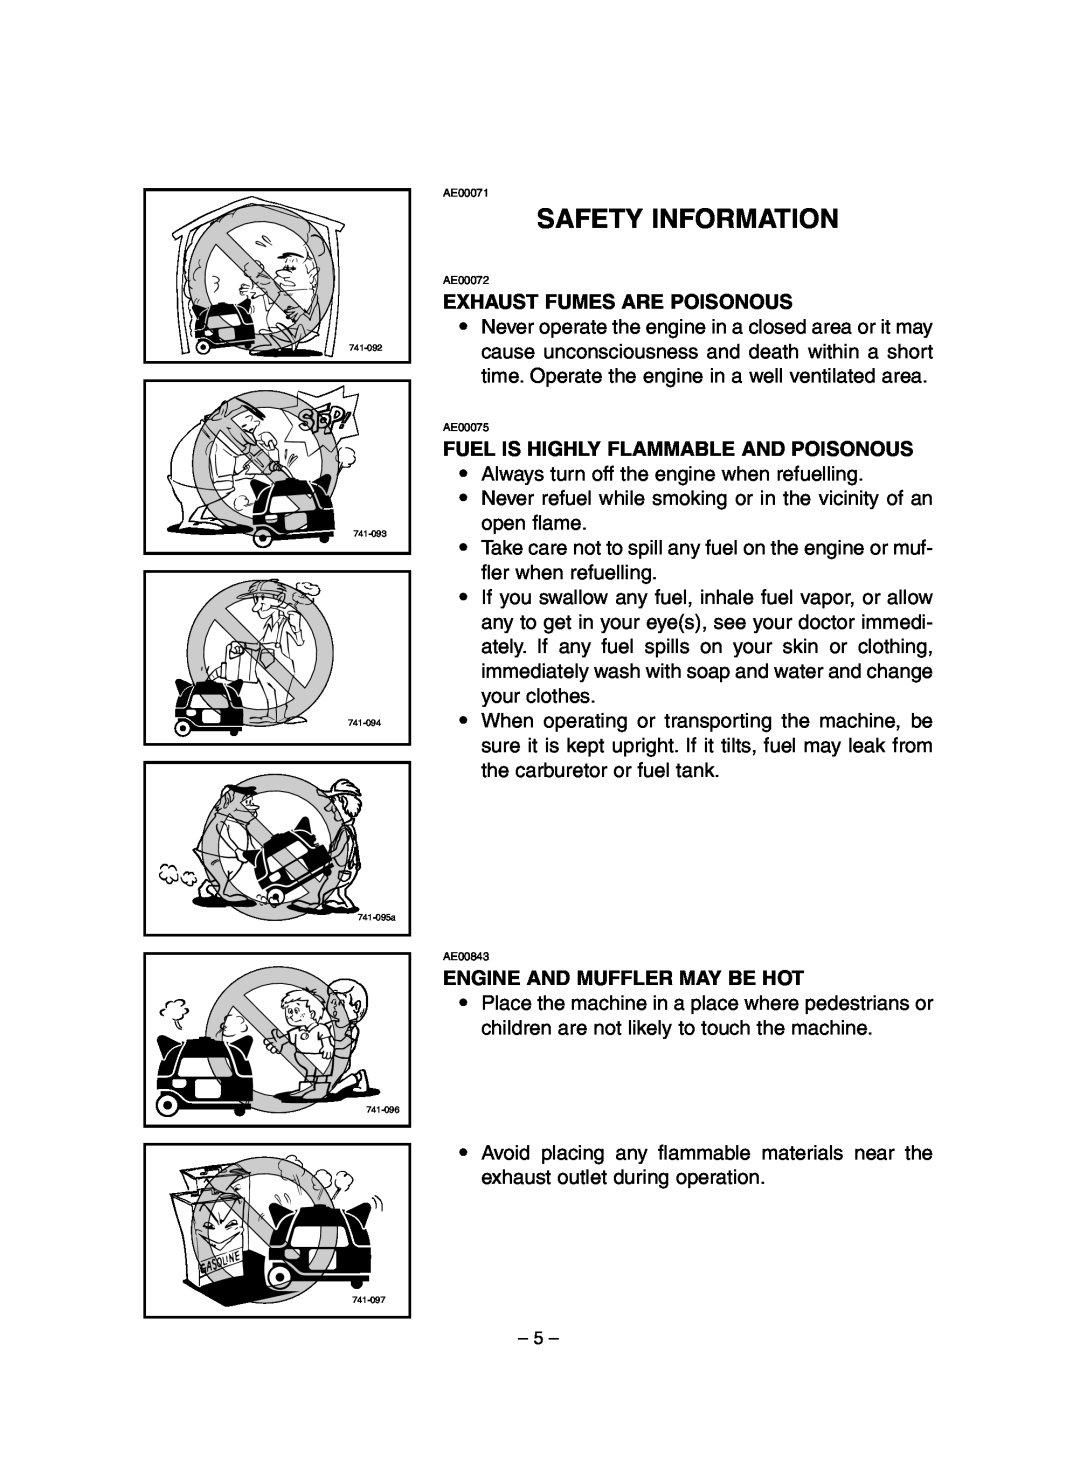 Yamaha EF3000iSE, EF3000iSEB Safety Information, Exhaust Fumes Are Poisonous, Fuel Is Highly Flammable And Poisonous 